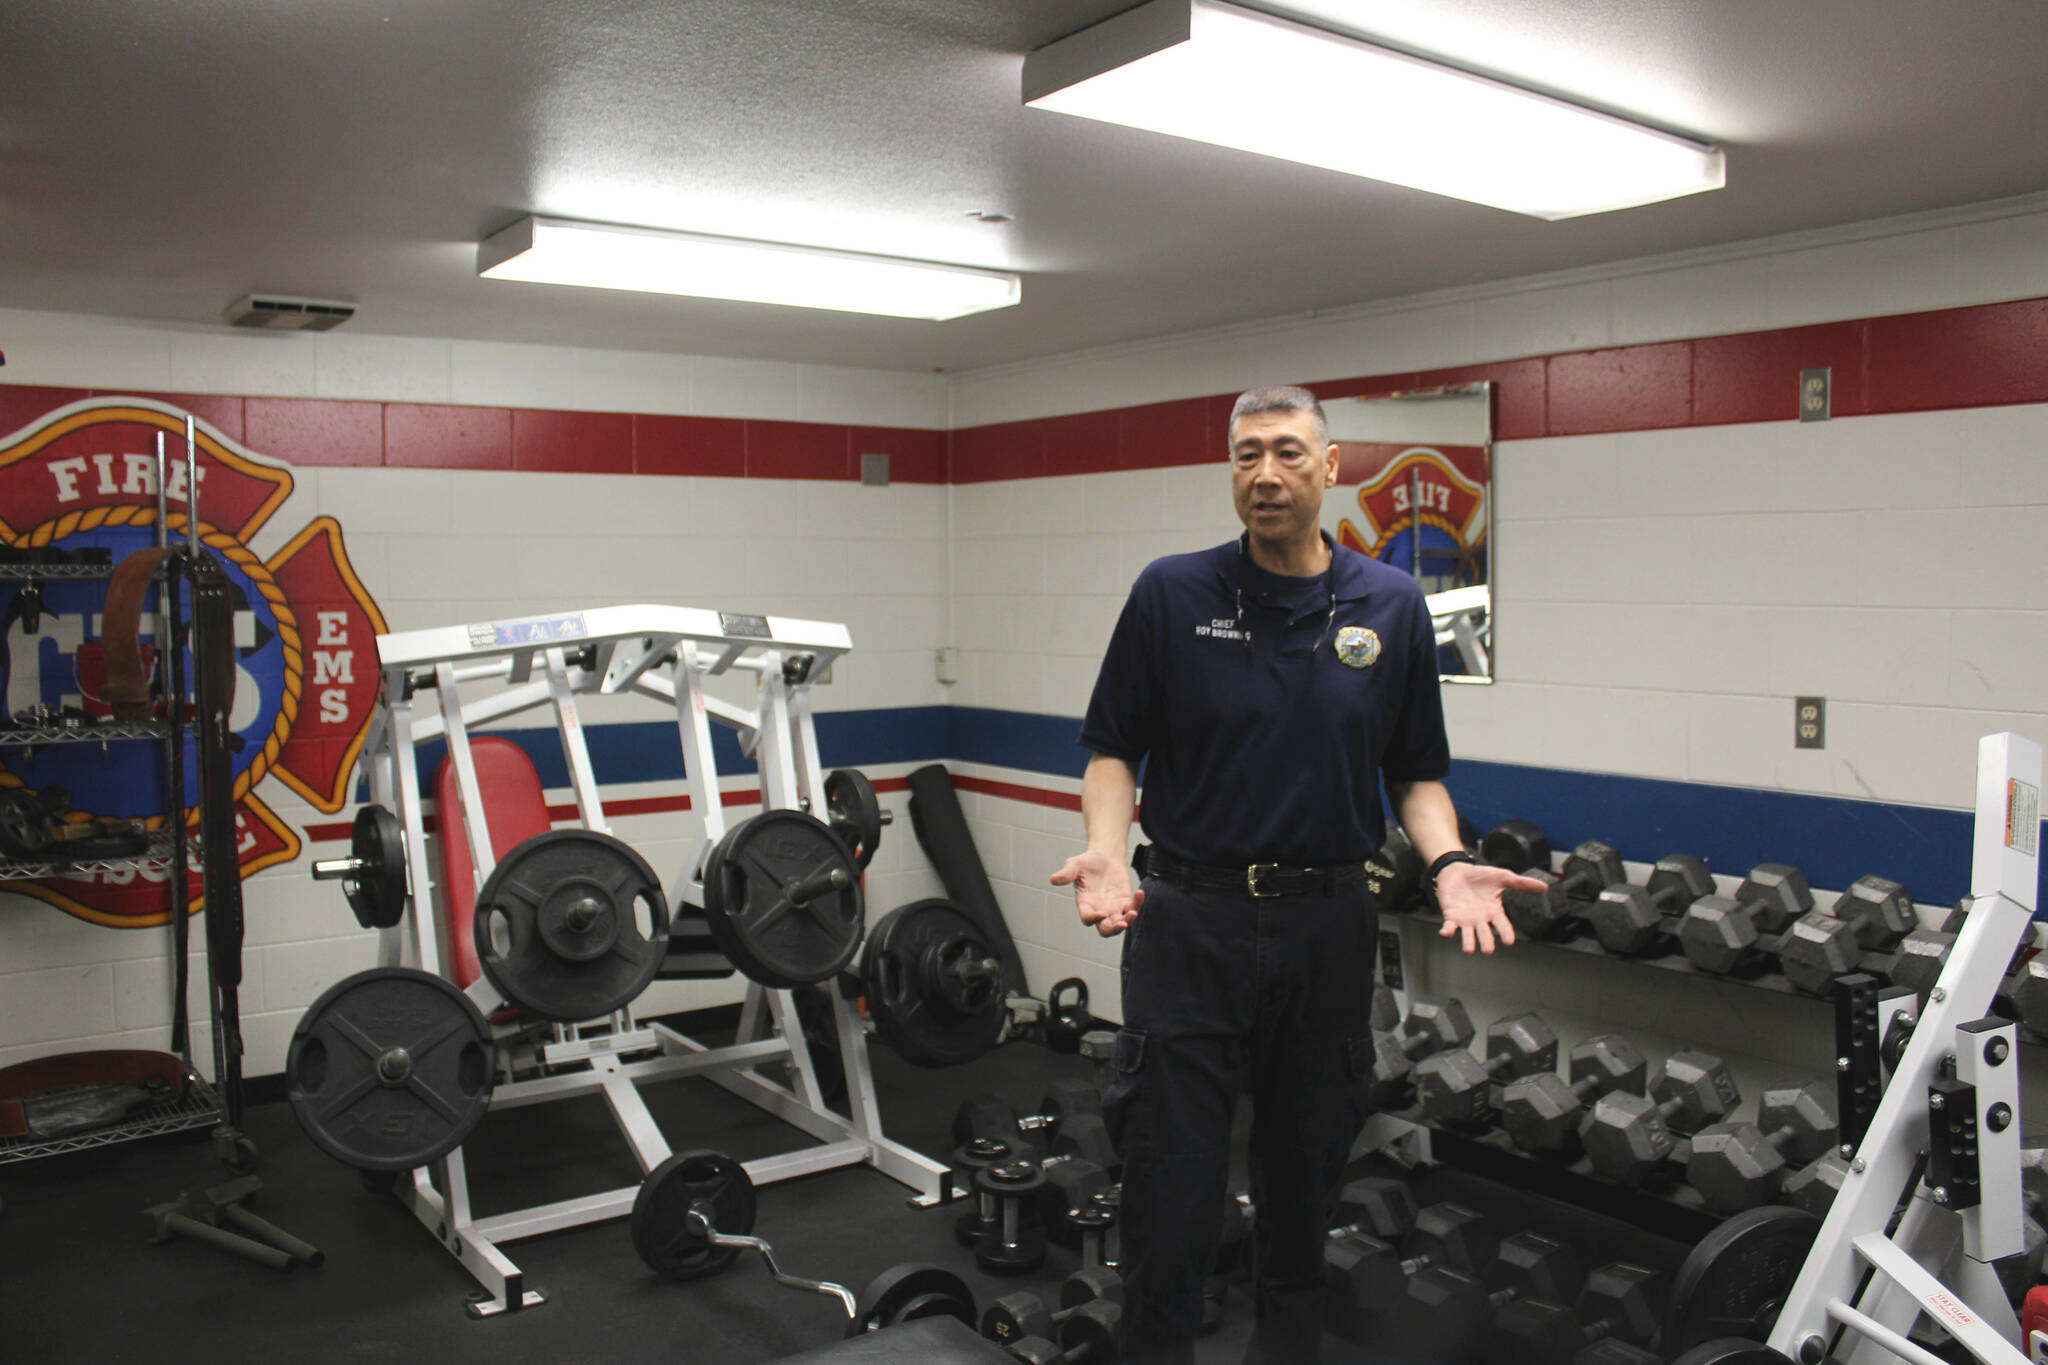 Central Emergency Services Fire Chief Roy Browning stands amid weights in the agency’s fitness room on Tuesday, July 26, 2022, in Soldotna, Alaska. (Ashlyn O’Hara/Peninsula Clarion)